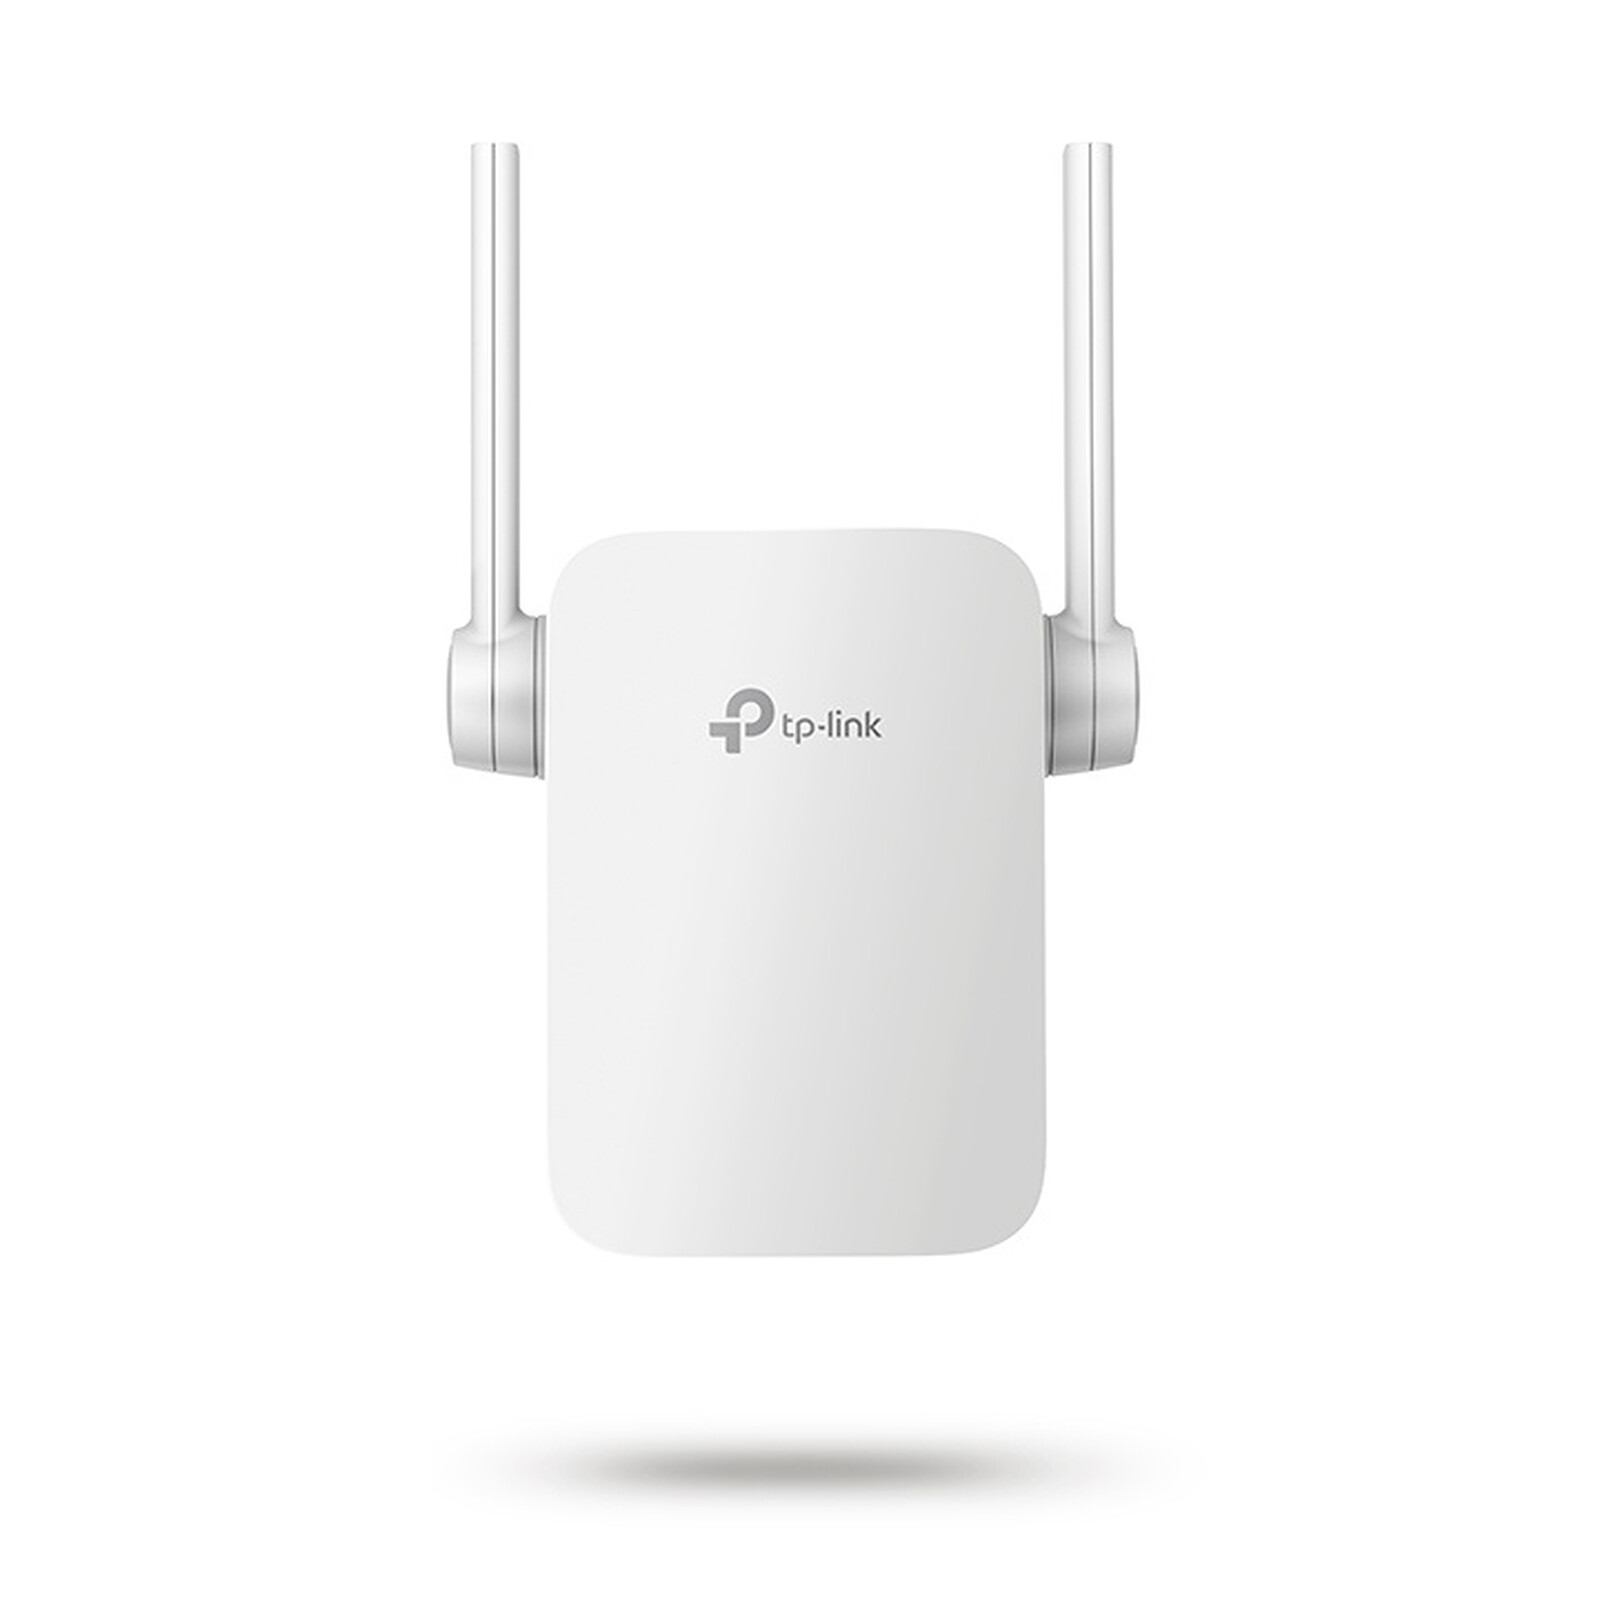 TP-Link RE305 - Price in FCFA - Dual-Band WiFi signal repeater (N300 +  AC867) - With Fast Ethernet port